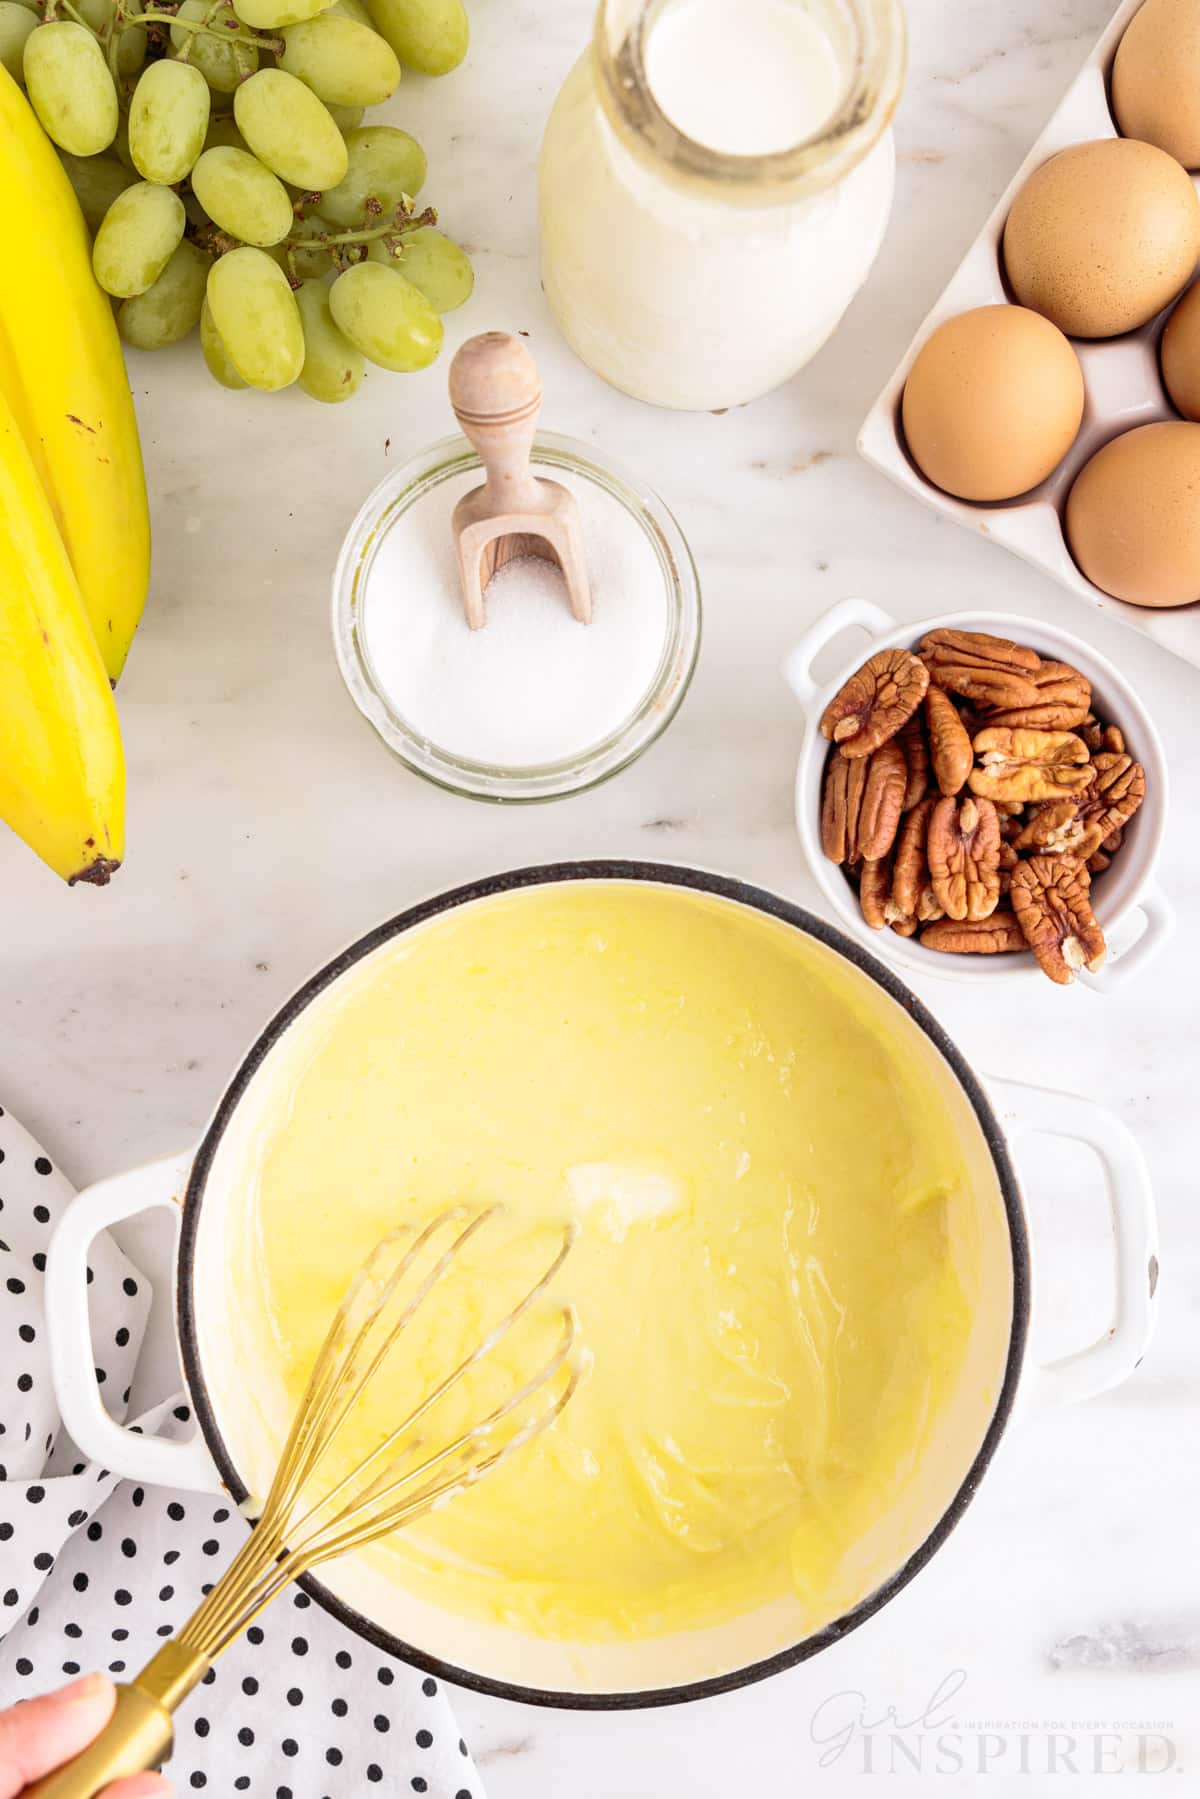 Saucepan with thickened custard, hand holding metal whisk in the custard mixture, polka dot linen, bunch of bananas, green grapes, bowl of granulated sugar, tray of eggs, bowl of pecans, jug of heavy cream, on a marble countertop.